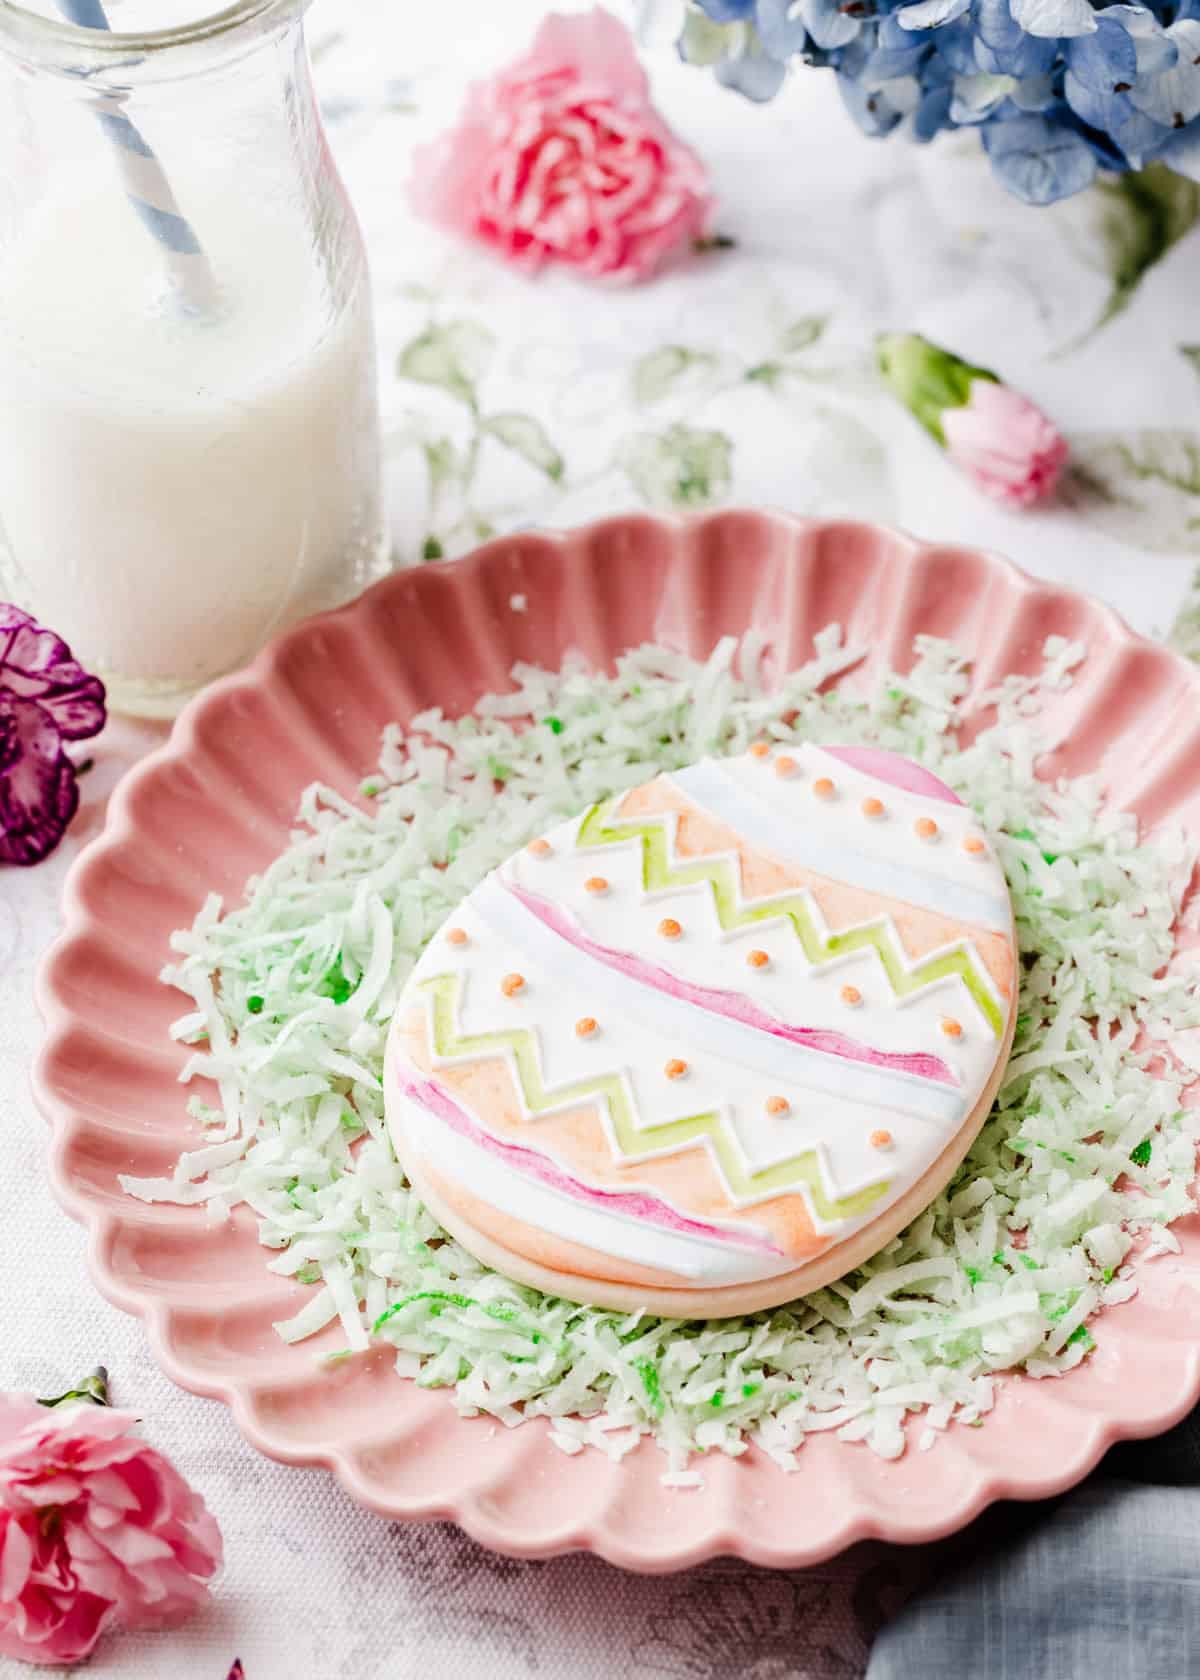 egg shaped cookie with white icing and painted with edible cookie coloring, on pink plate.